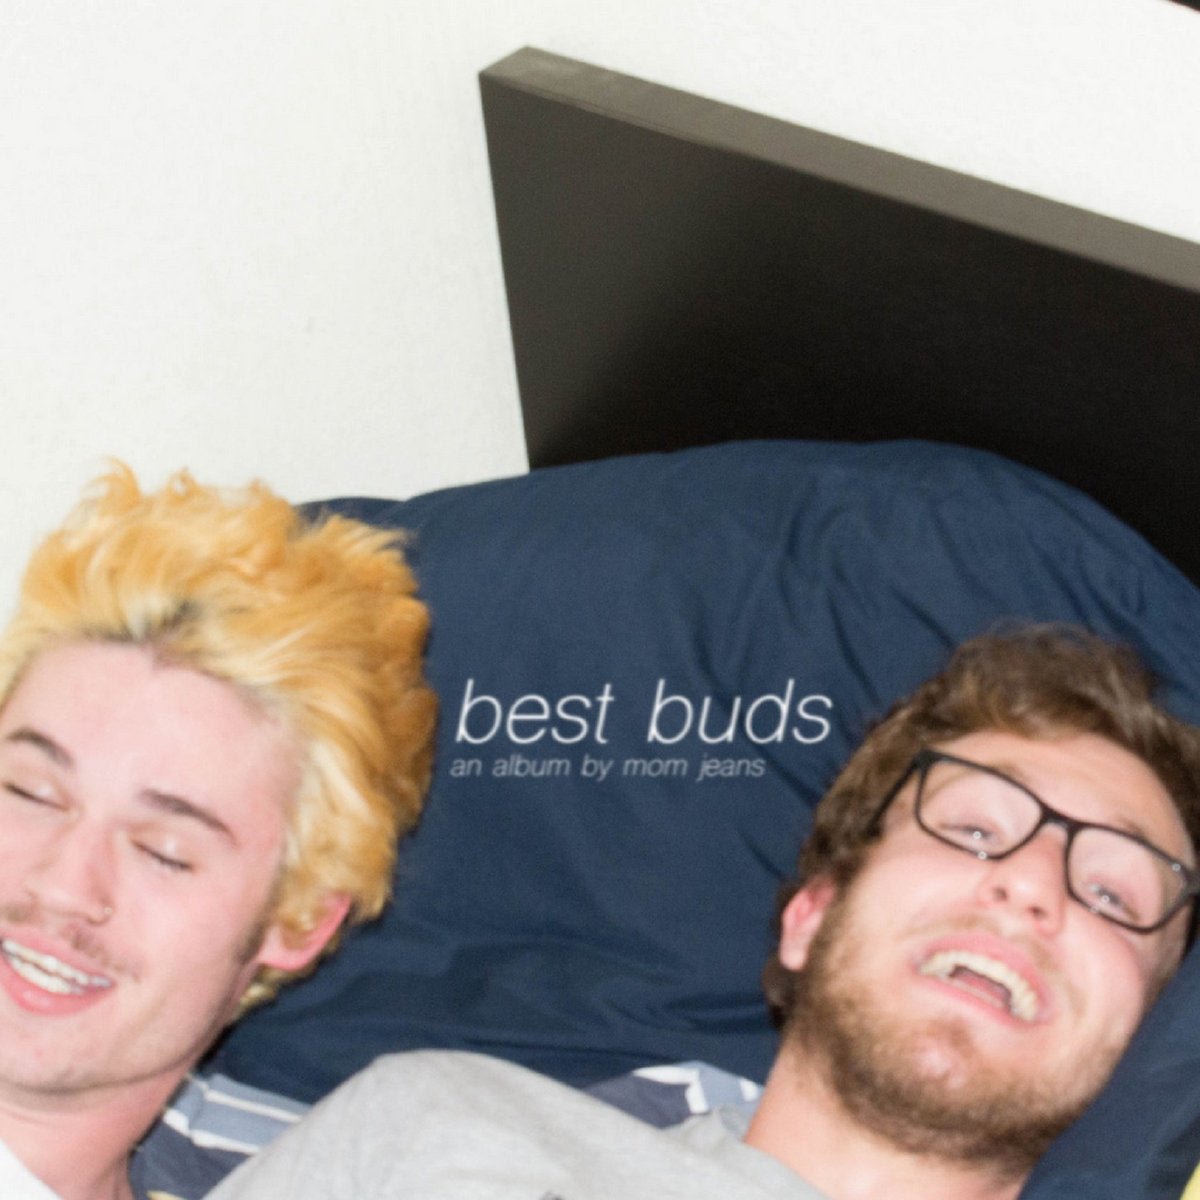 Mom Jeans - Best Buds LP - Vinyl - Counter Intuitive